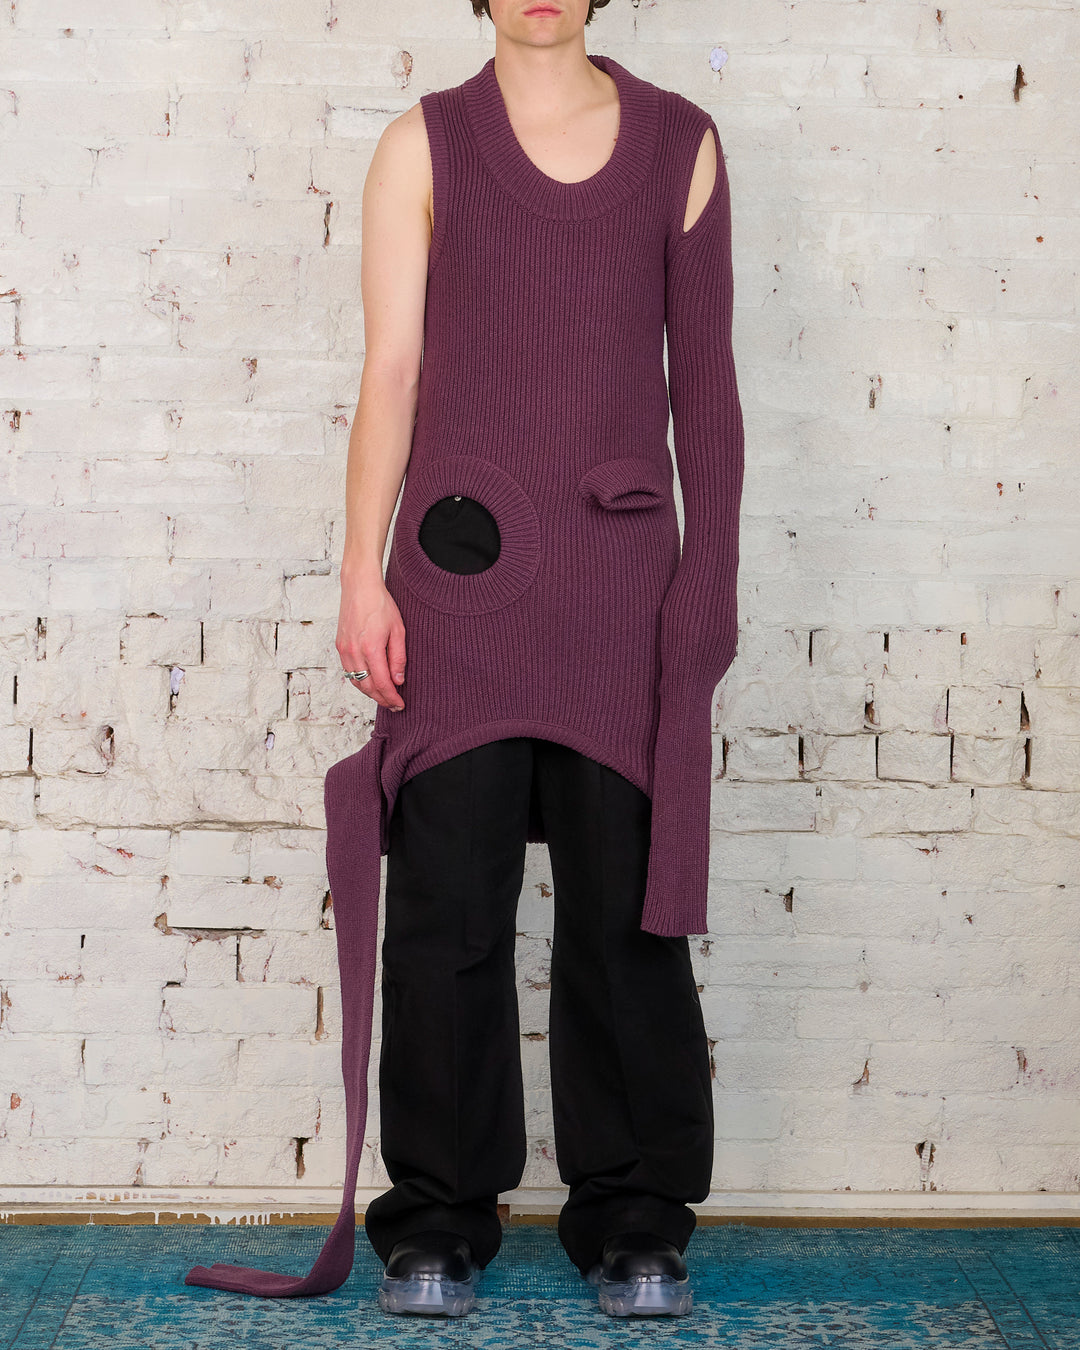 Rick Owens Recycled Cashmere Banana Sweater Amethyst